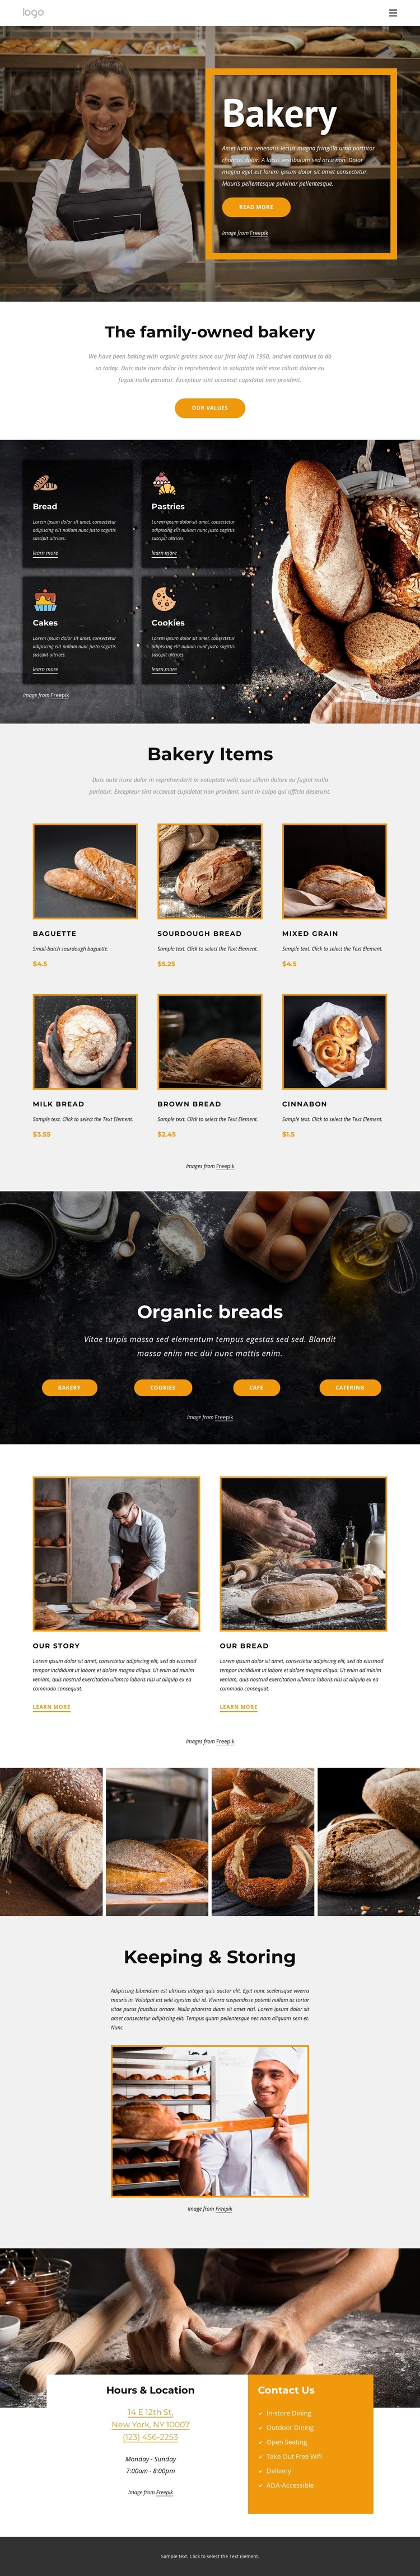 The family-owned bakery Joomla Template